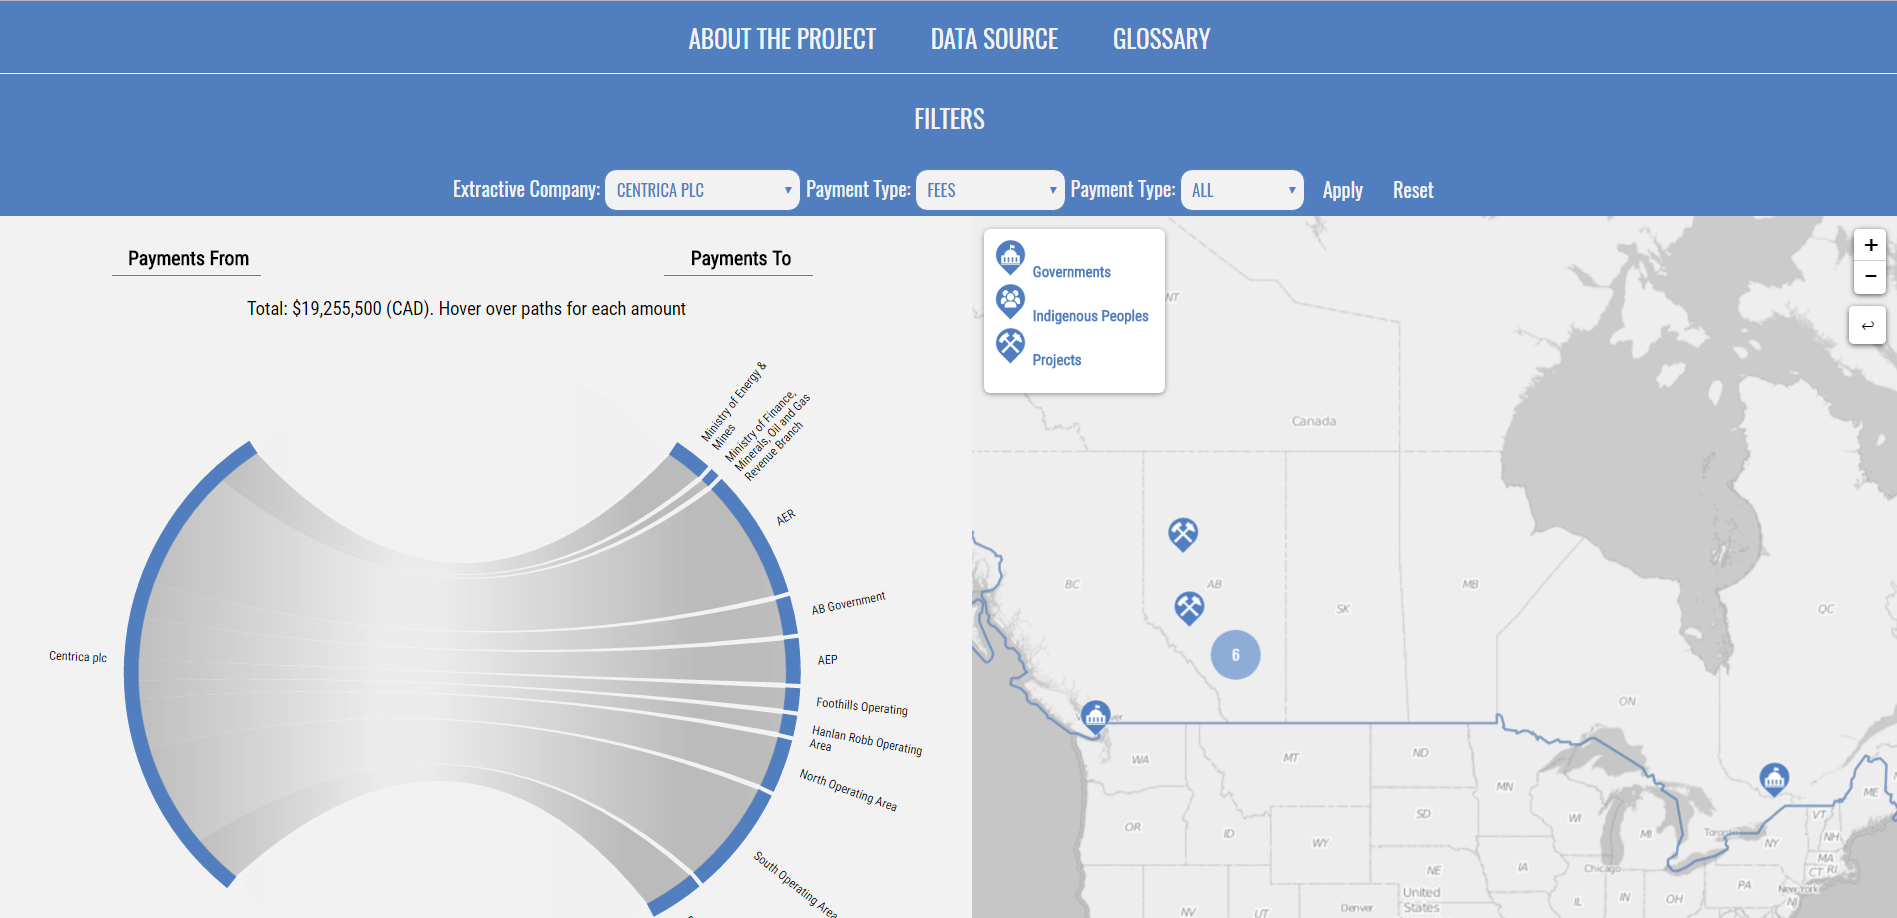 Image demo of the interactive dashboard for Publish What You Pay Canada